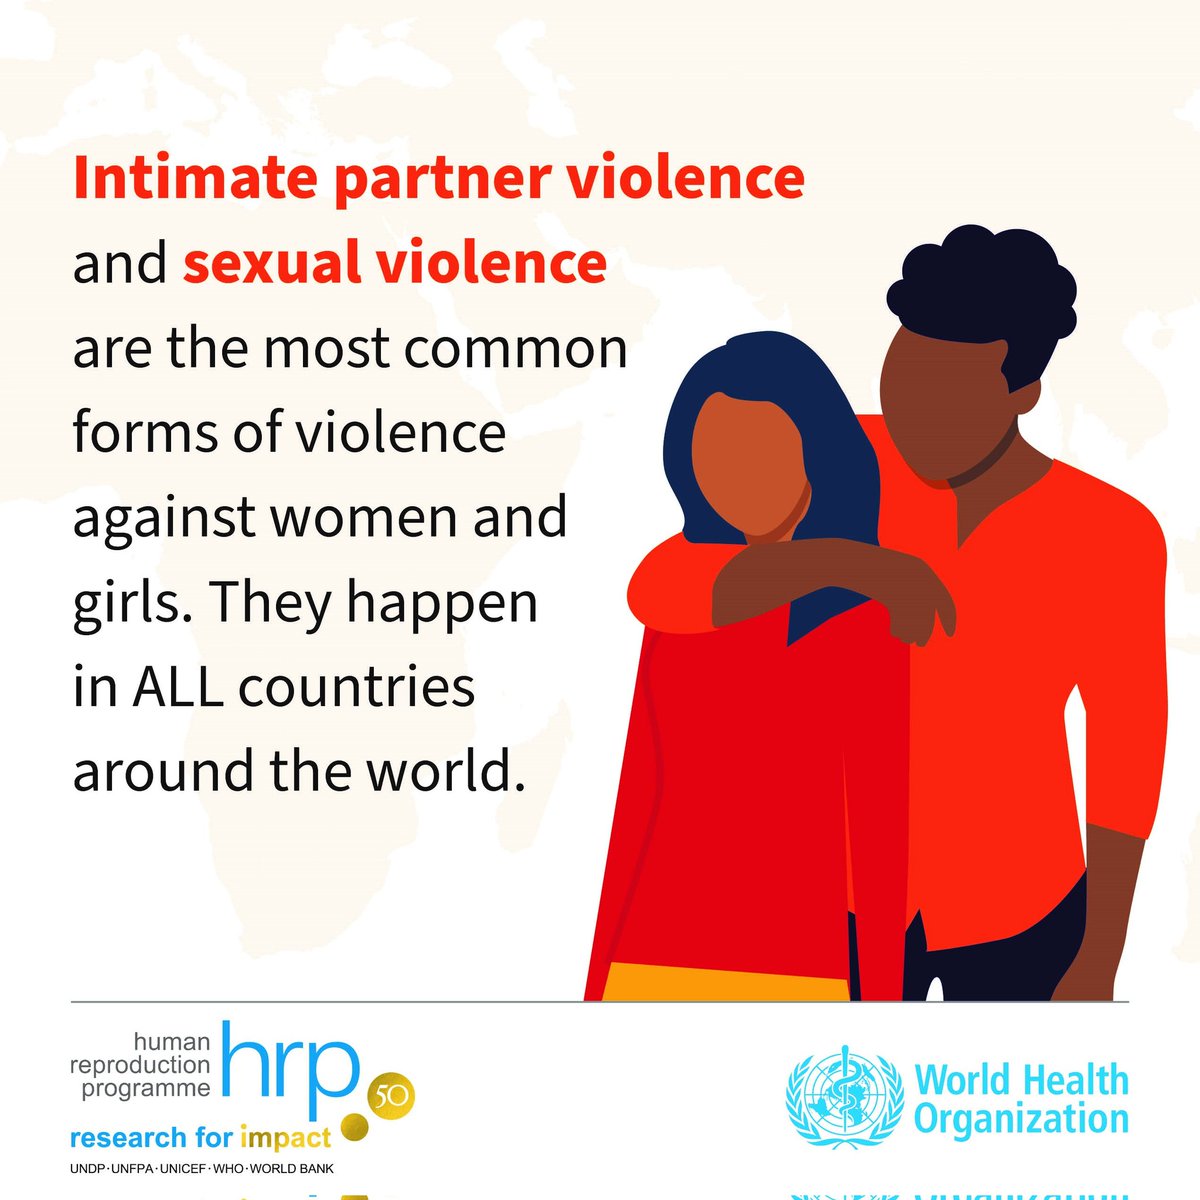 About 1 in 3 (30%) women globally experience physical &/or sexual violence, mostly at the hands of an intimate partner

In every country & culture, more action is needed to ensure women live a life free of violence & coercion

#EndViolenceAgainstWomenAndGirls